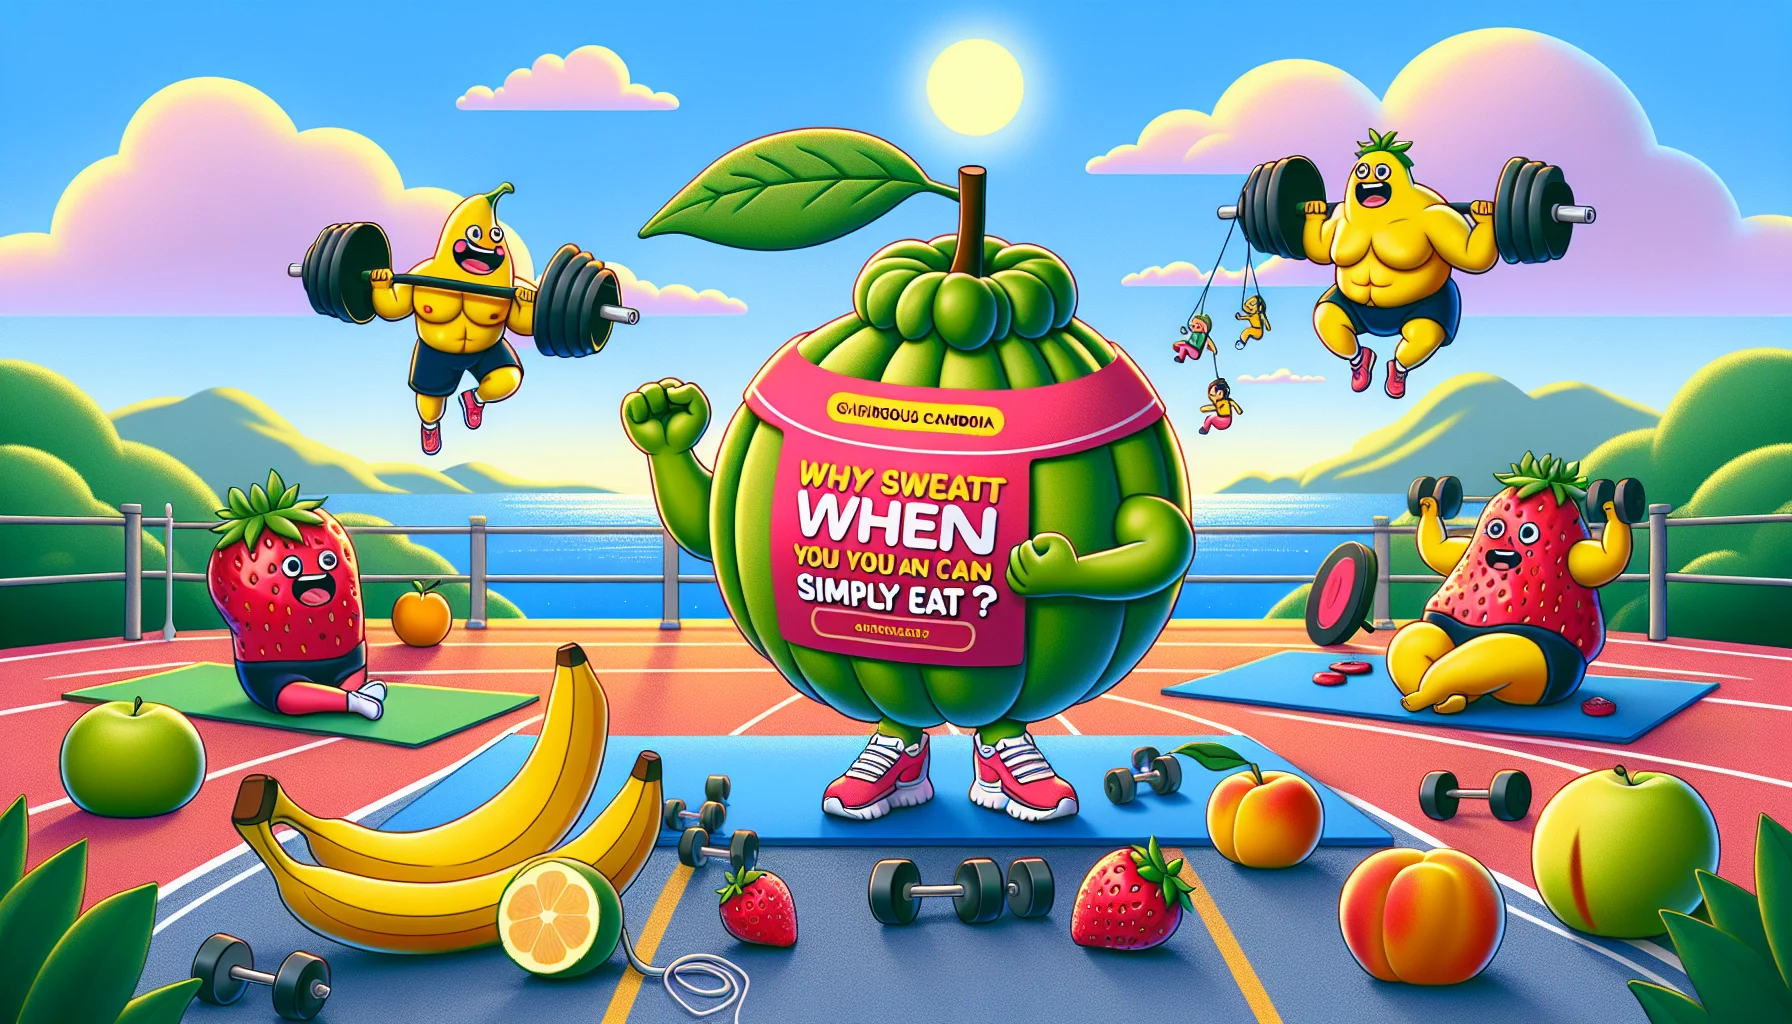 Create a humorous image featuring a make-believe fruit, called 'Vigorous Vito', which is similar to a real-world Garcinia Cambogia. It's branded as 'Nature's Catalyst' for fitness aspirations. Set in an animated gym environment where different fruits are engaged in various exercises: a bunch of bananas lifting weights, strawberries running on the track, peaches doing yoga, each personifying the spirit of fitness. A highlight on 'Vigorous Vito', which unlike others, is relaxed and still managing to maintain a fit shape. Add a catchy tagline like: 'Why sweat when you can simply eat?'. Please maintain vibrant and attractive color schemes to incite interest in fitness.